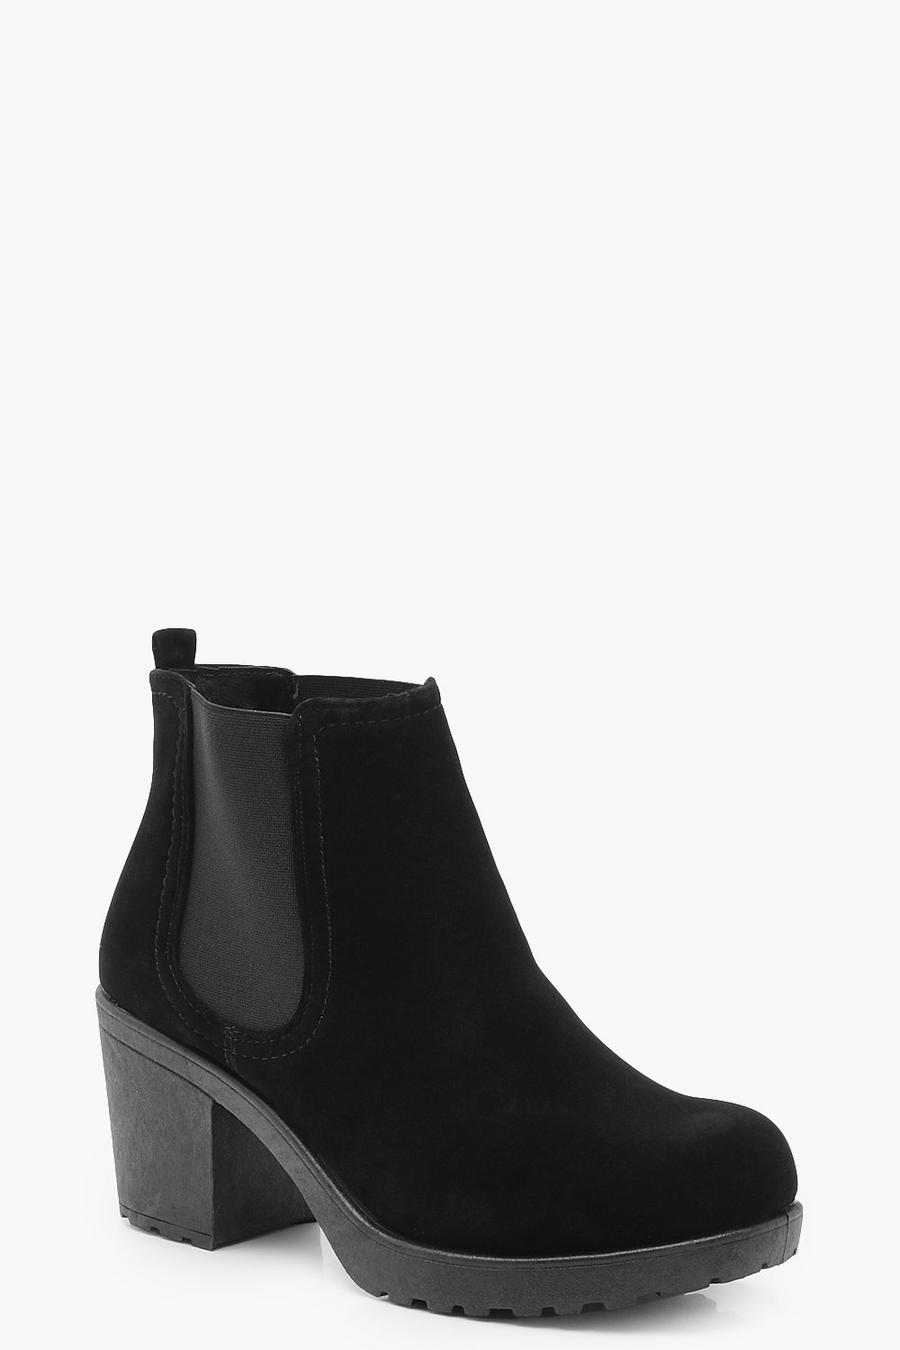 Black Wide Width Suedette Cleated Heel Chelsea Boots image number 1